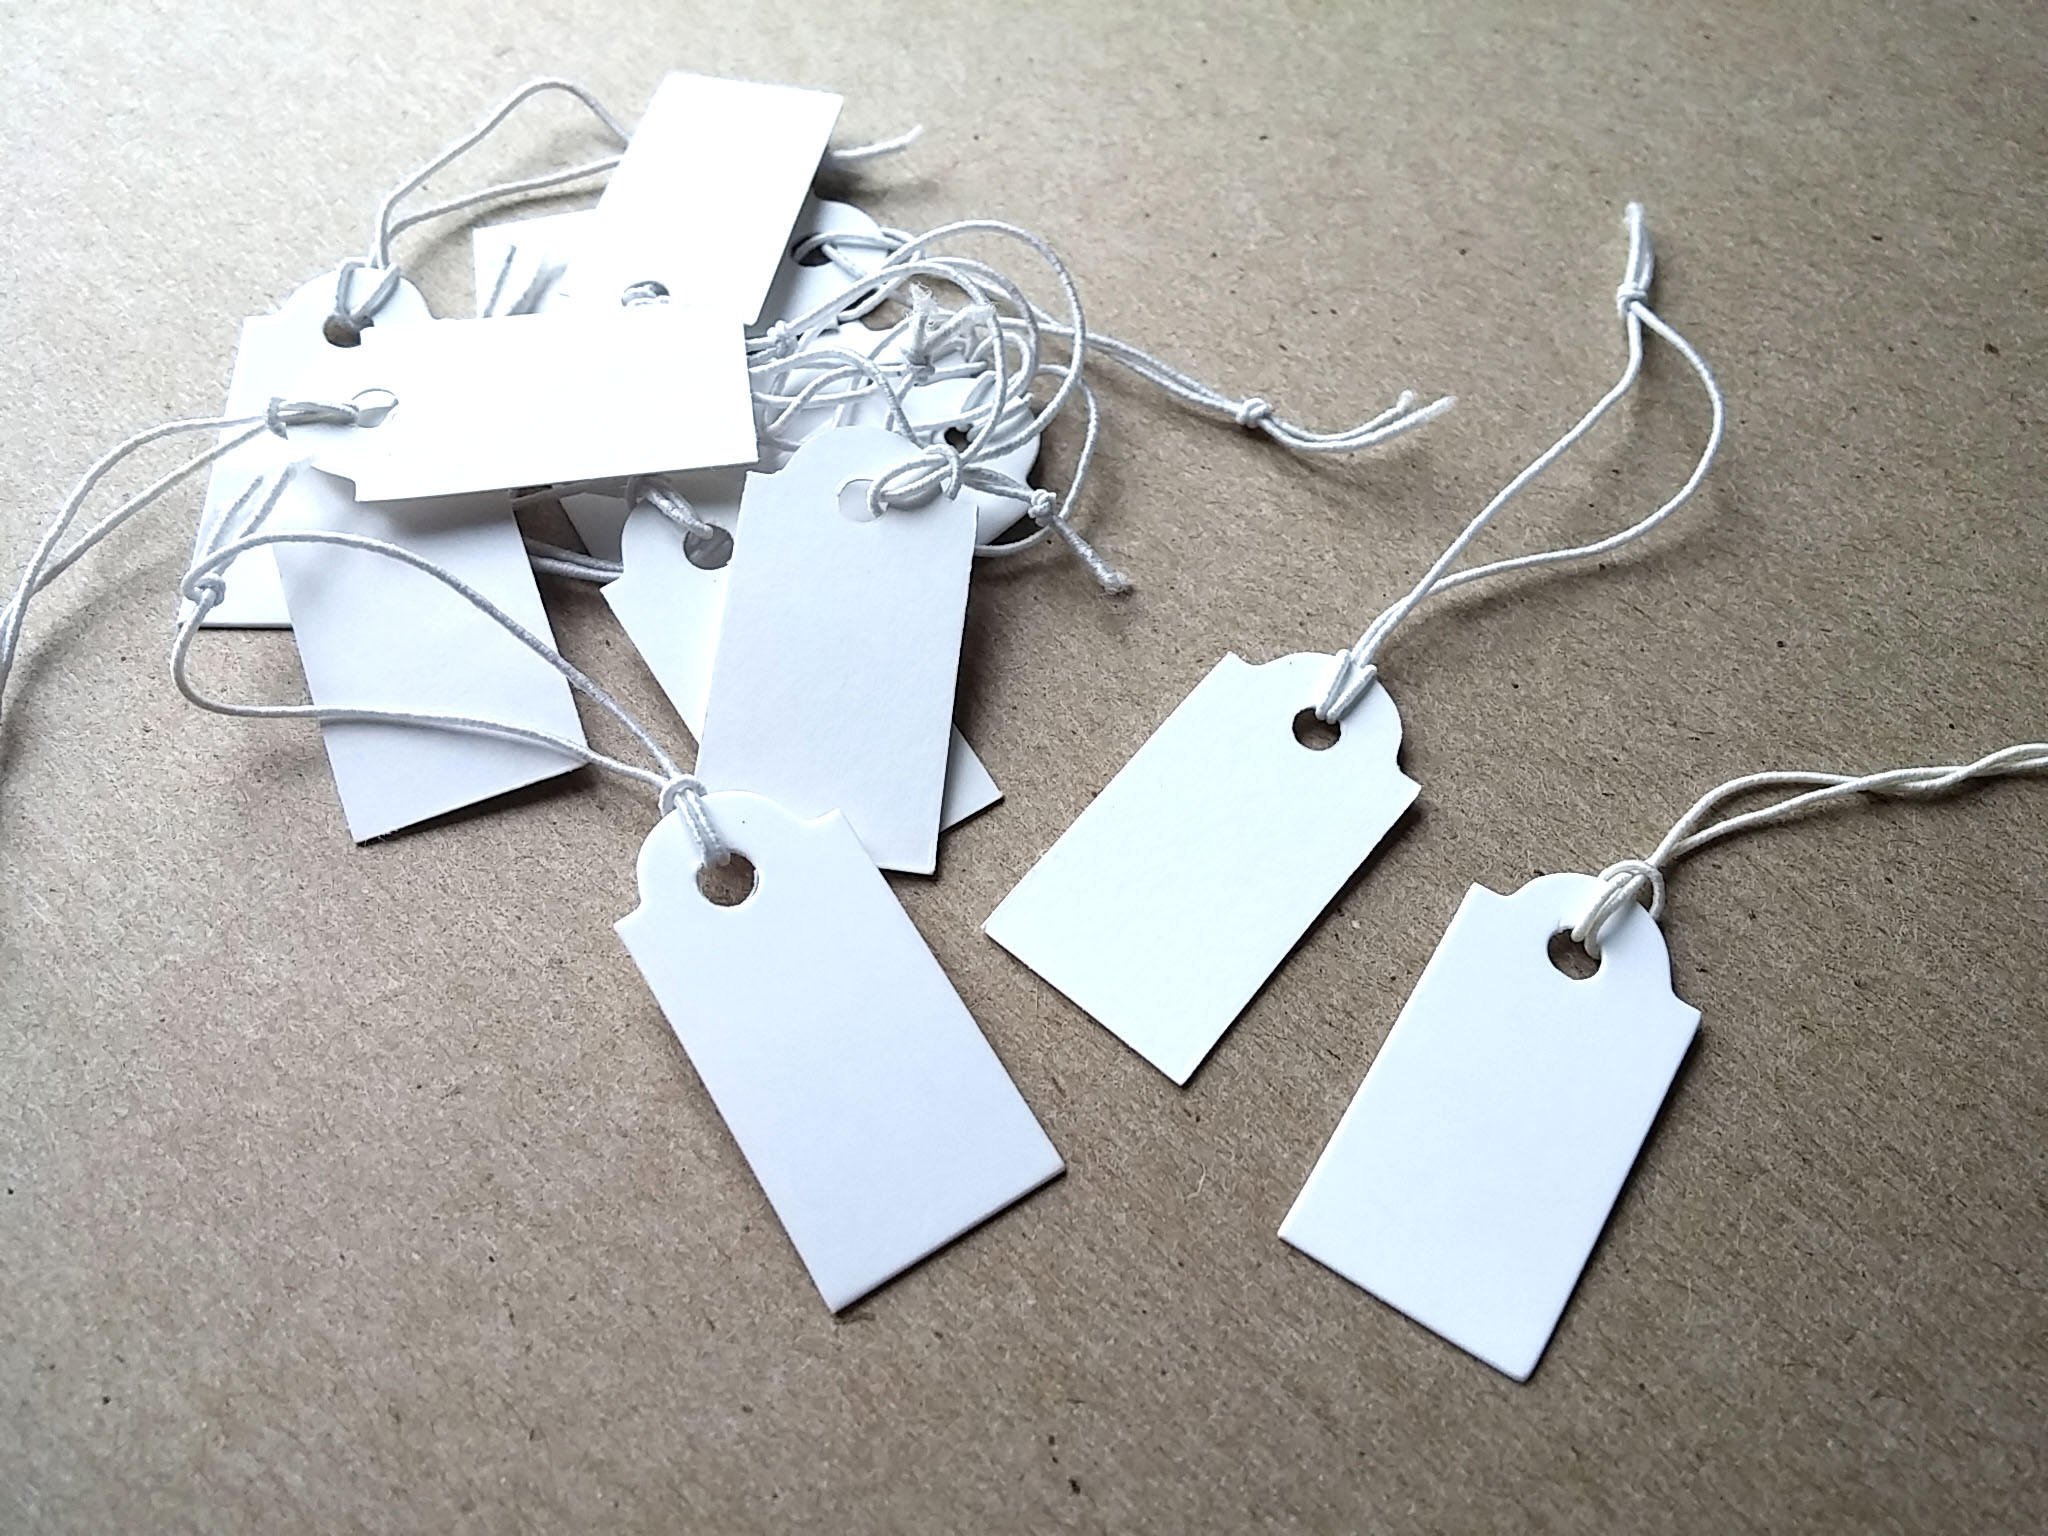 White Blank Scallop Gift Price Tags String Tags Jewelry Retail Tags 100  Piece PK